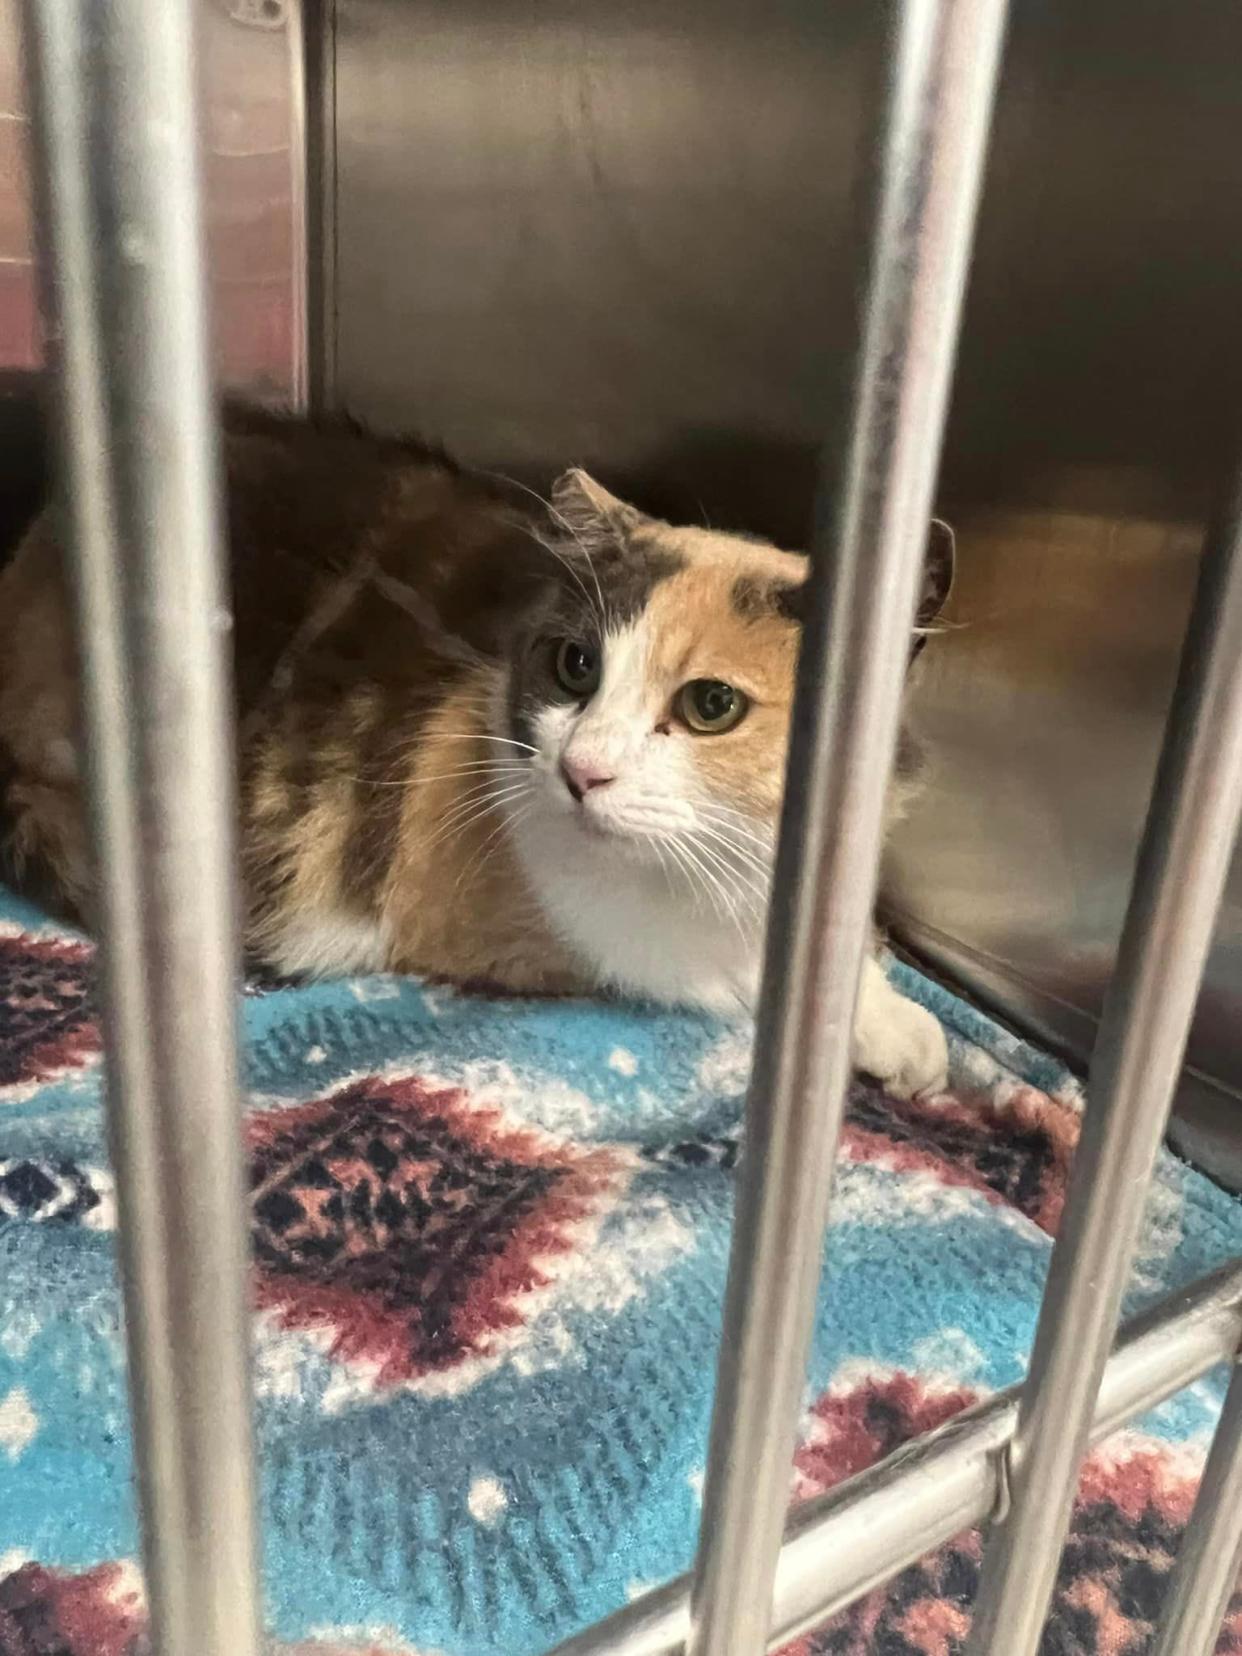 Pickles the Cat is safe and back in Fort Walton Beach. After vitriolic comments on social media, Pickles may not be safe living at Publix anymore.